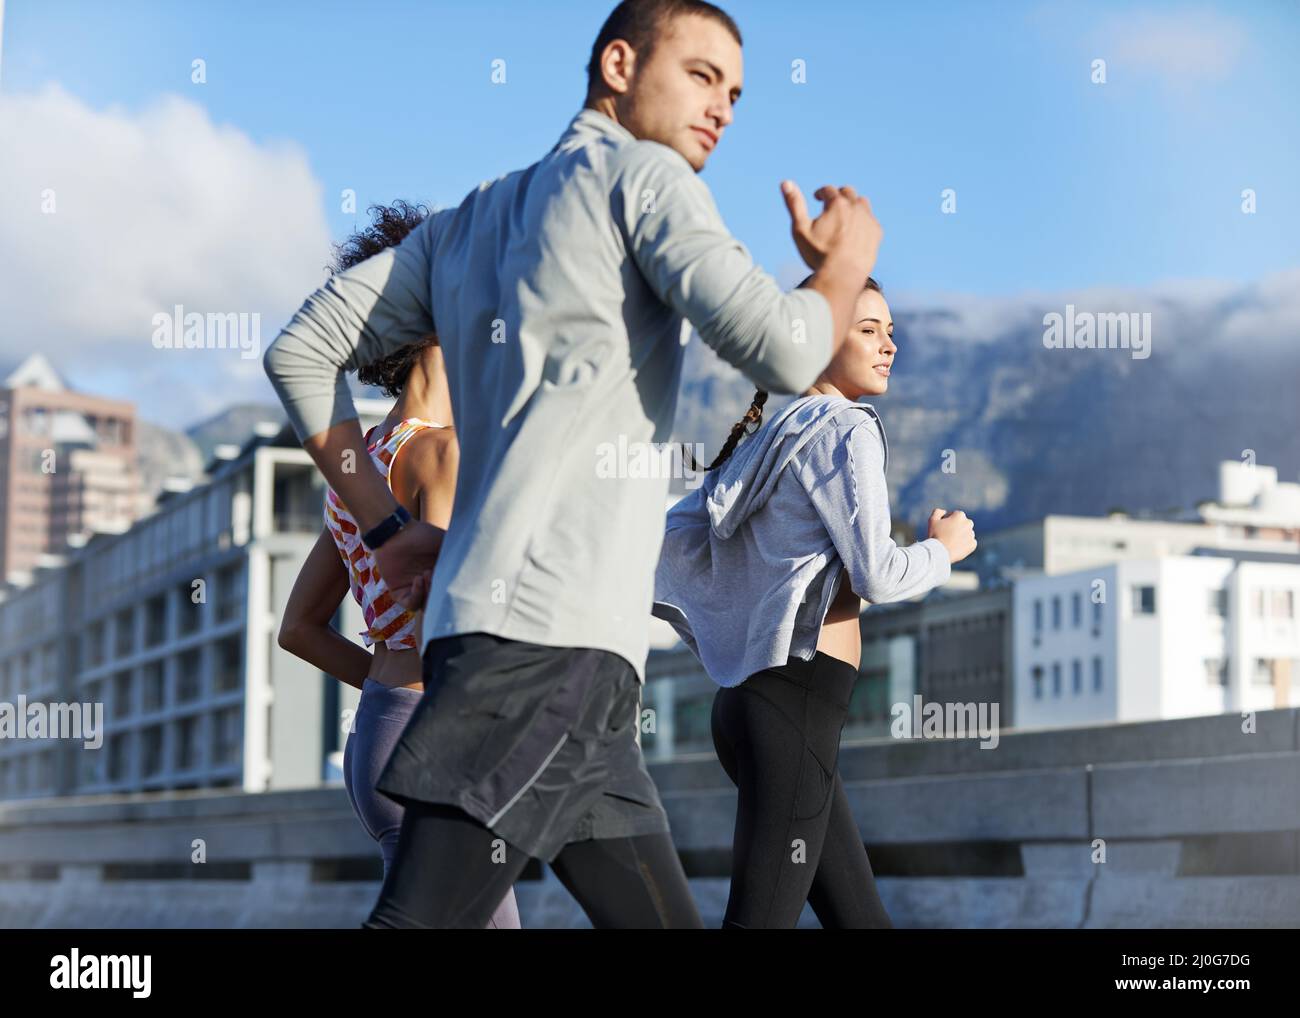 We push each other further. Shot of a group of friends jogging together through the city. Stock Photo